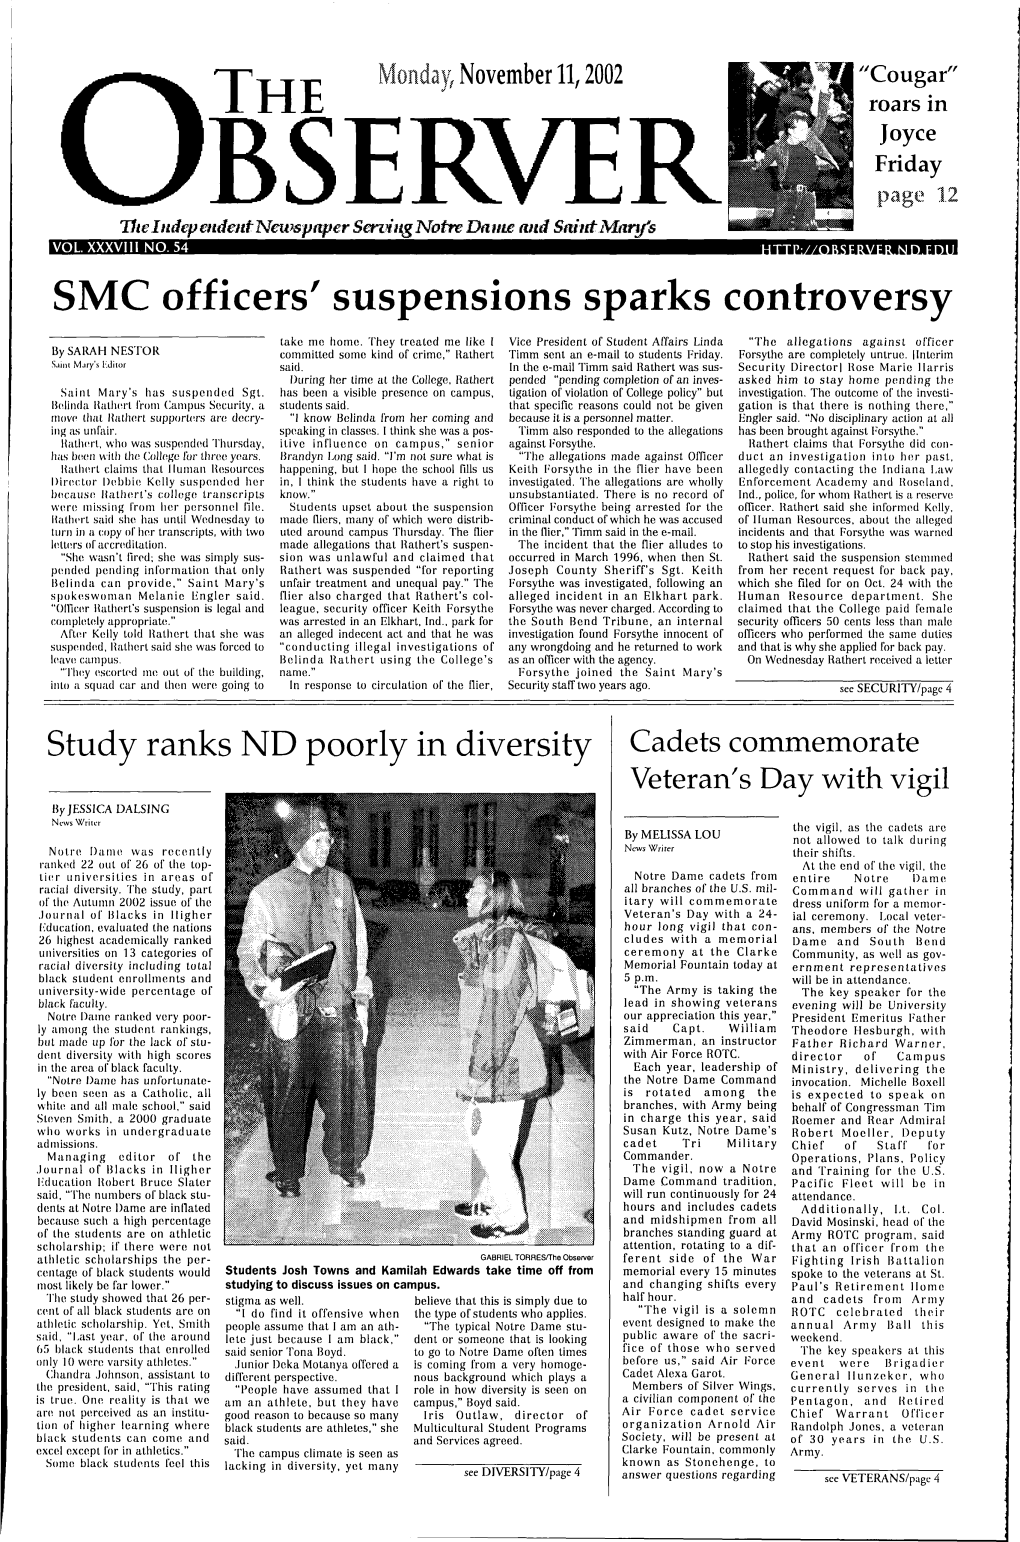 SMC Officers' Suspensions Sparks Controversy